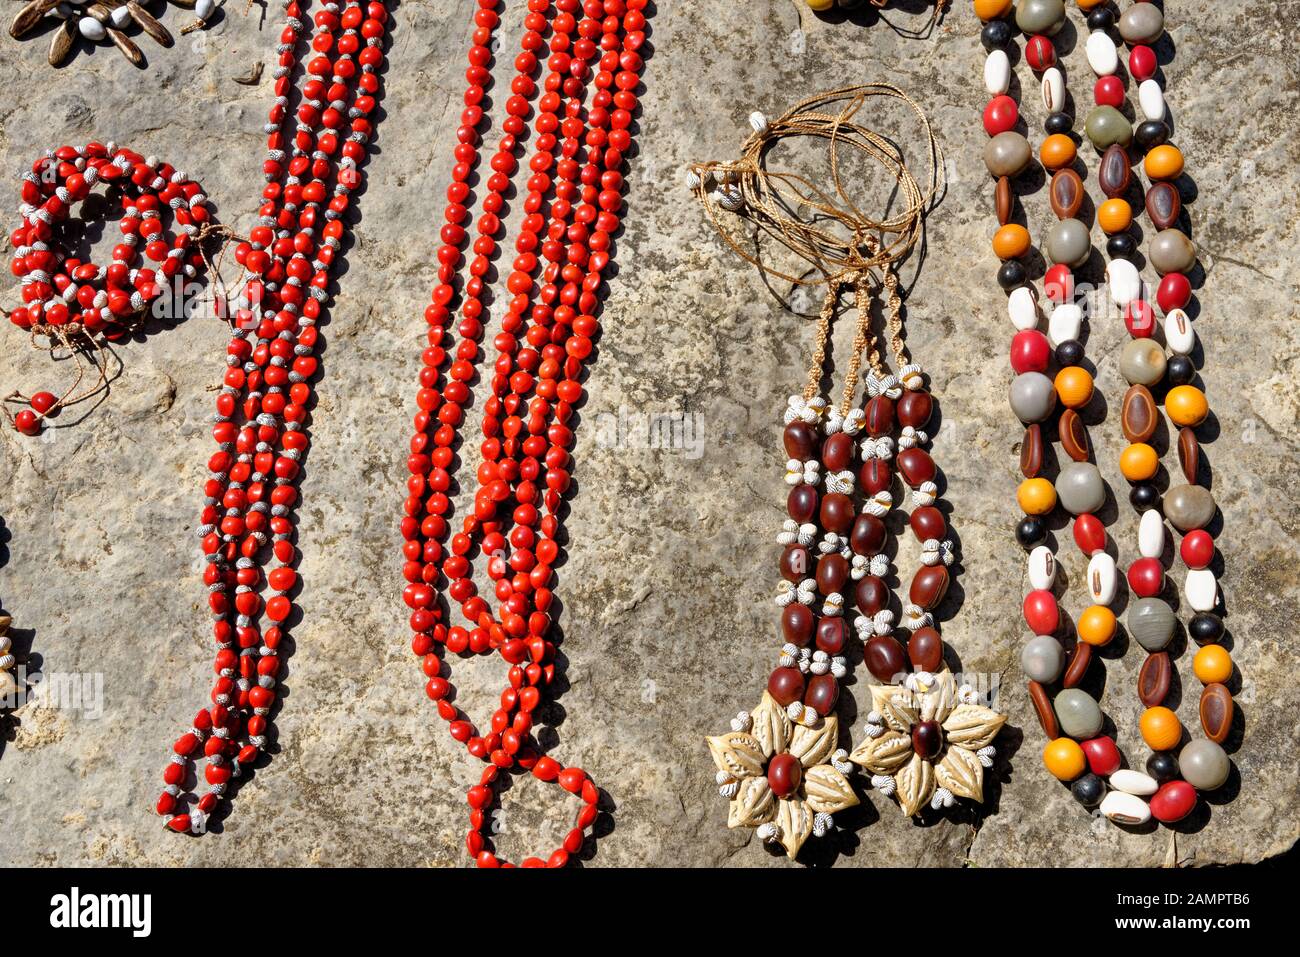 Typical Cuban souvenir: handmade jewelry. Popular in Cuban accounts,  organic jewelry made from Caribbean seeds. Photo taken in Viniales - Cuba  Stock Photo - Alamy